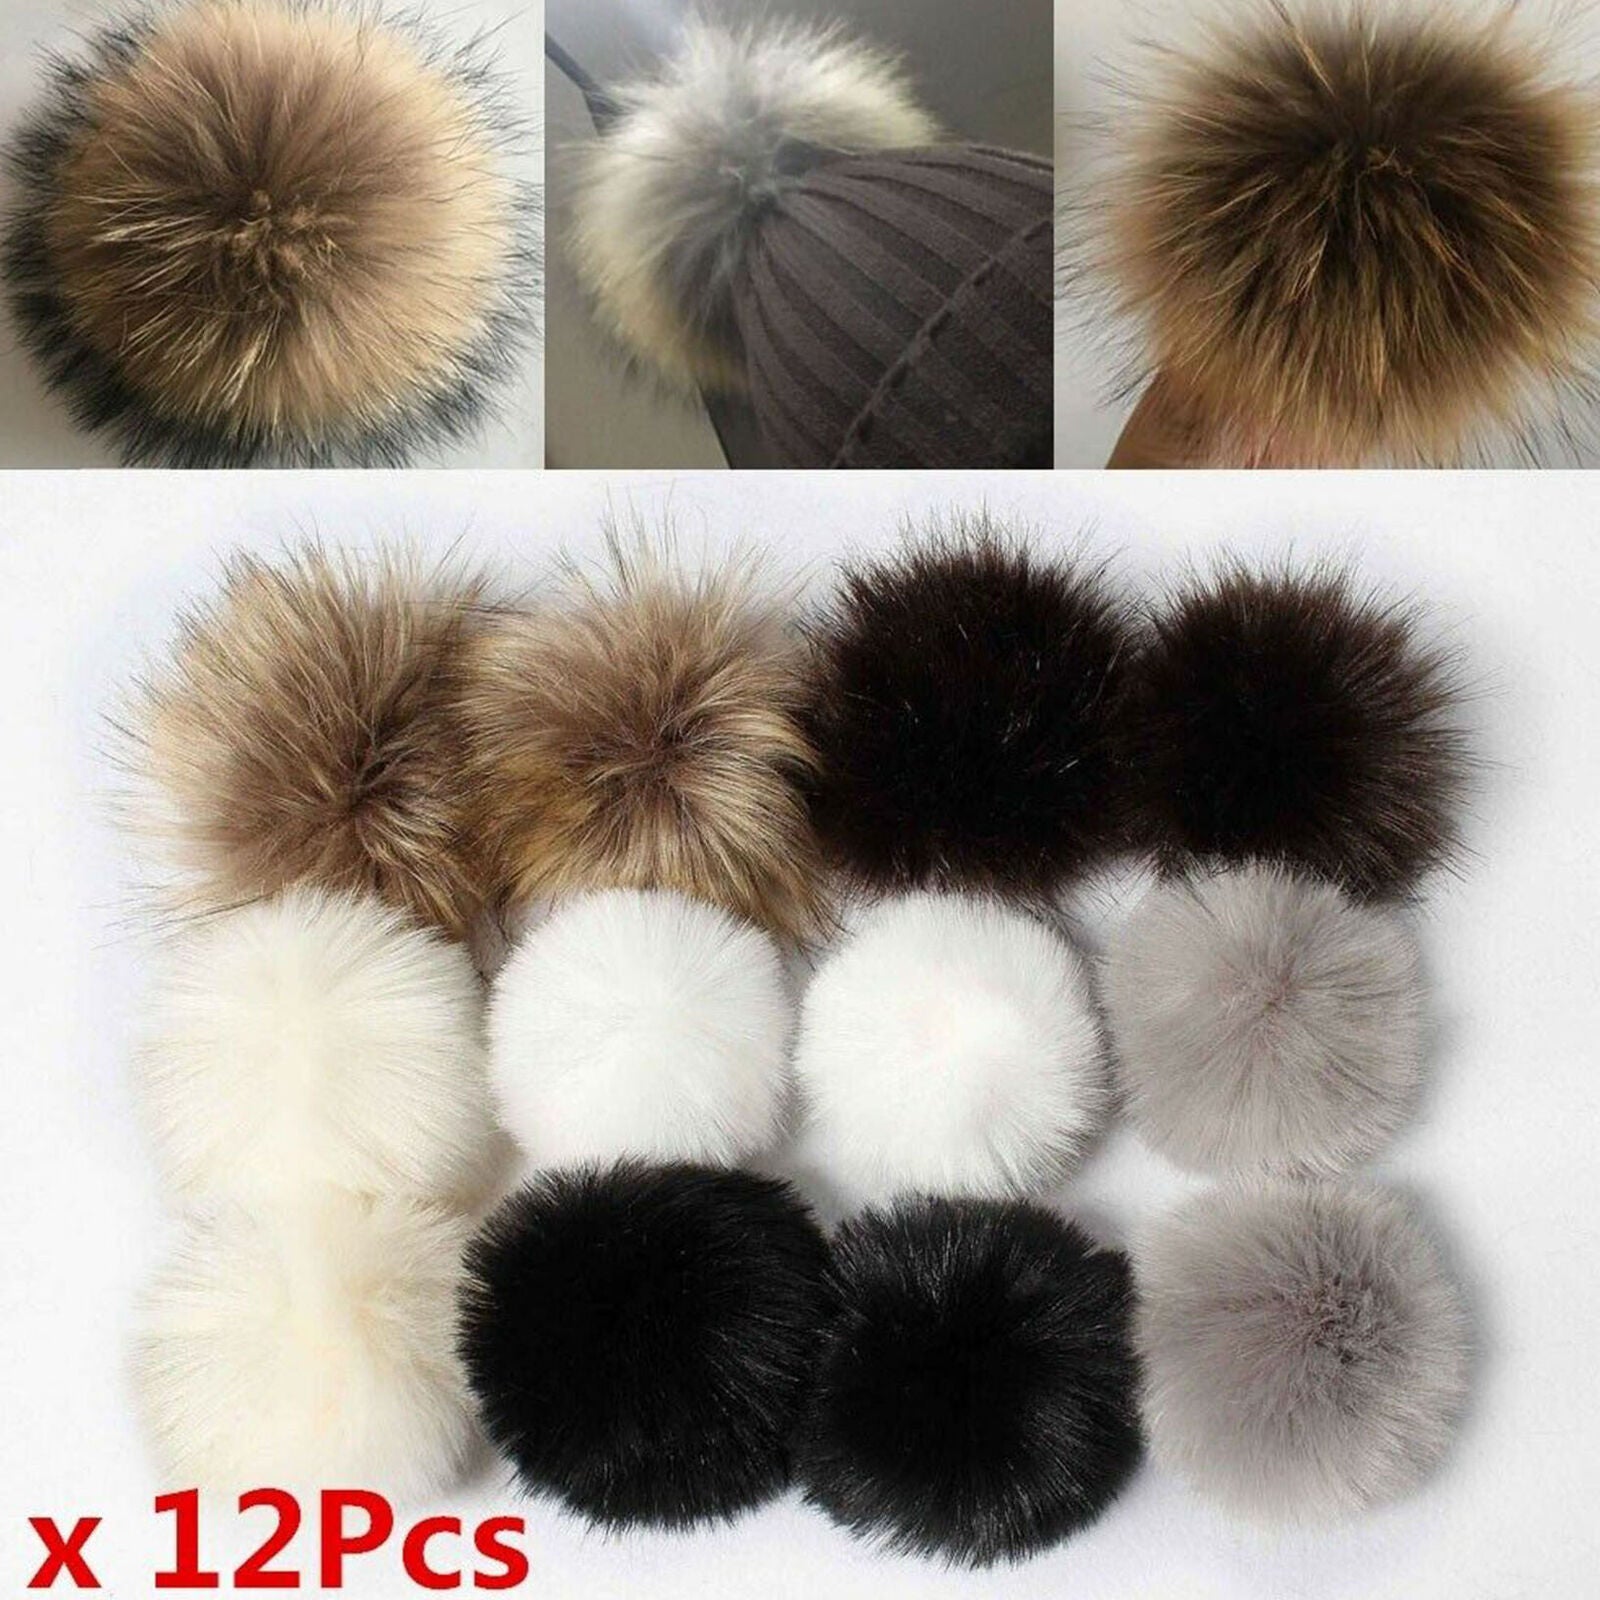 12Pcs Faux Fur PomPom Ball Fluffy Ball Pendant Accessories For Bags Hat Keychain